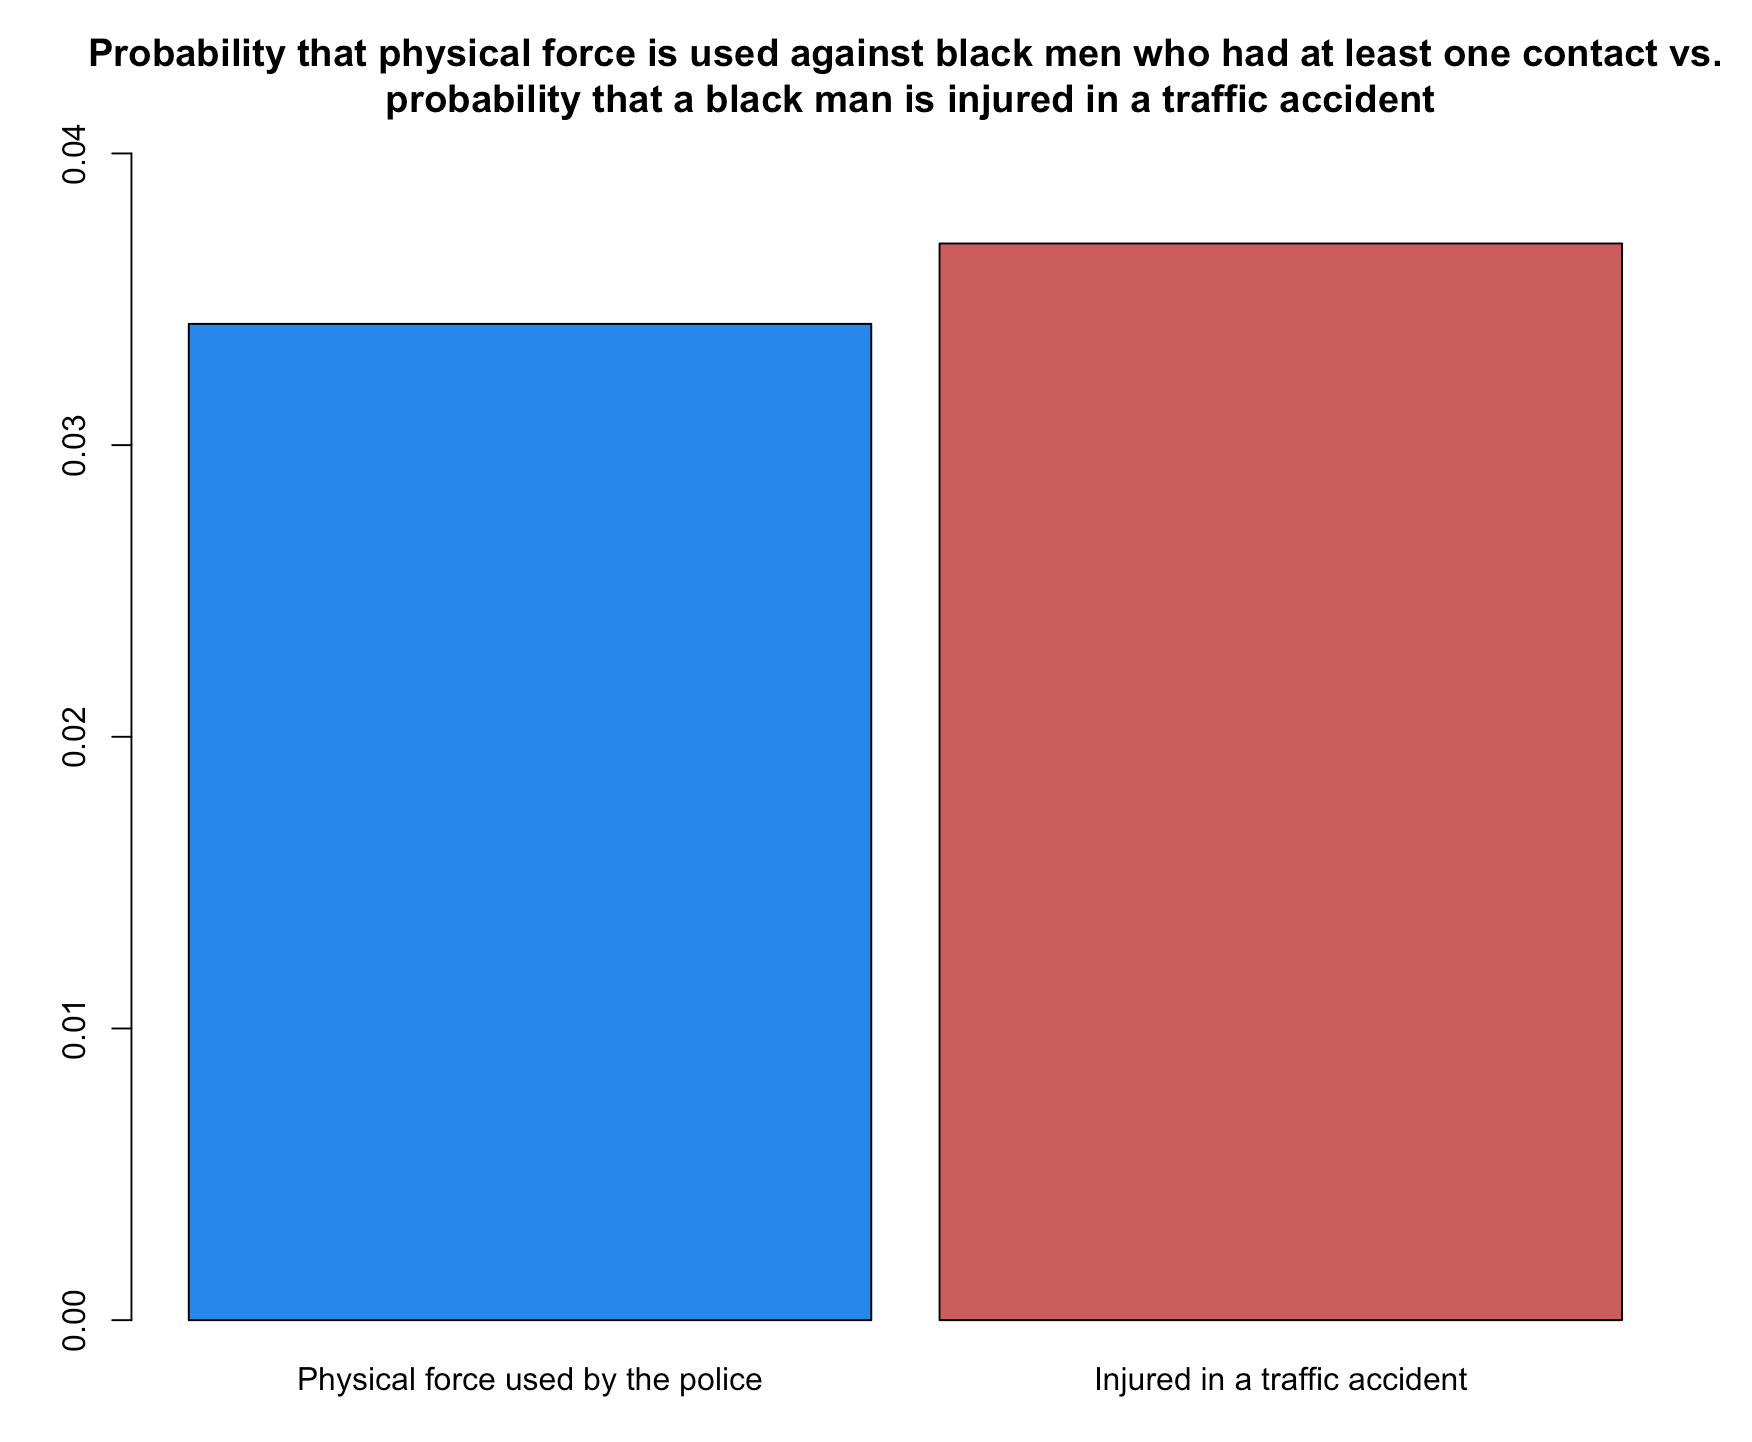 Probability-that-physical-force-is-used-against-black-men-who-had-at-least-one-contact-vs.-probability-that-a-black-man-is-injured-in-a-traffic-accident.png